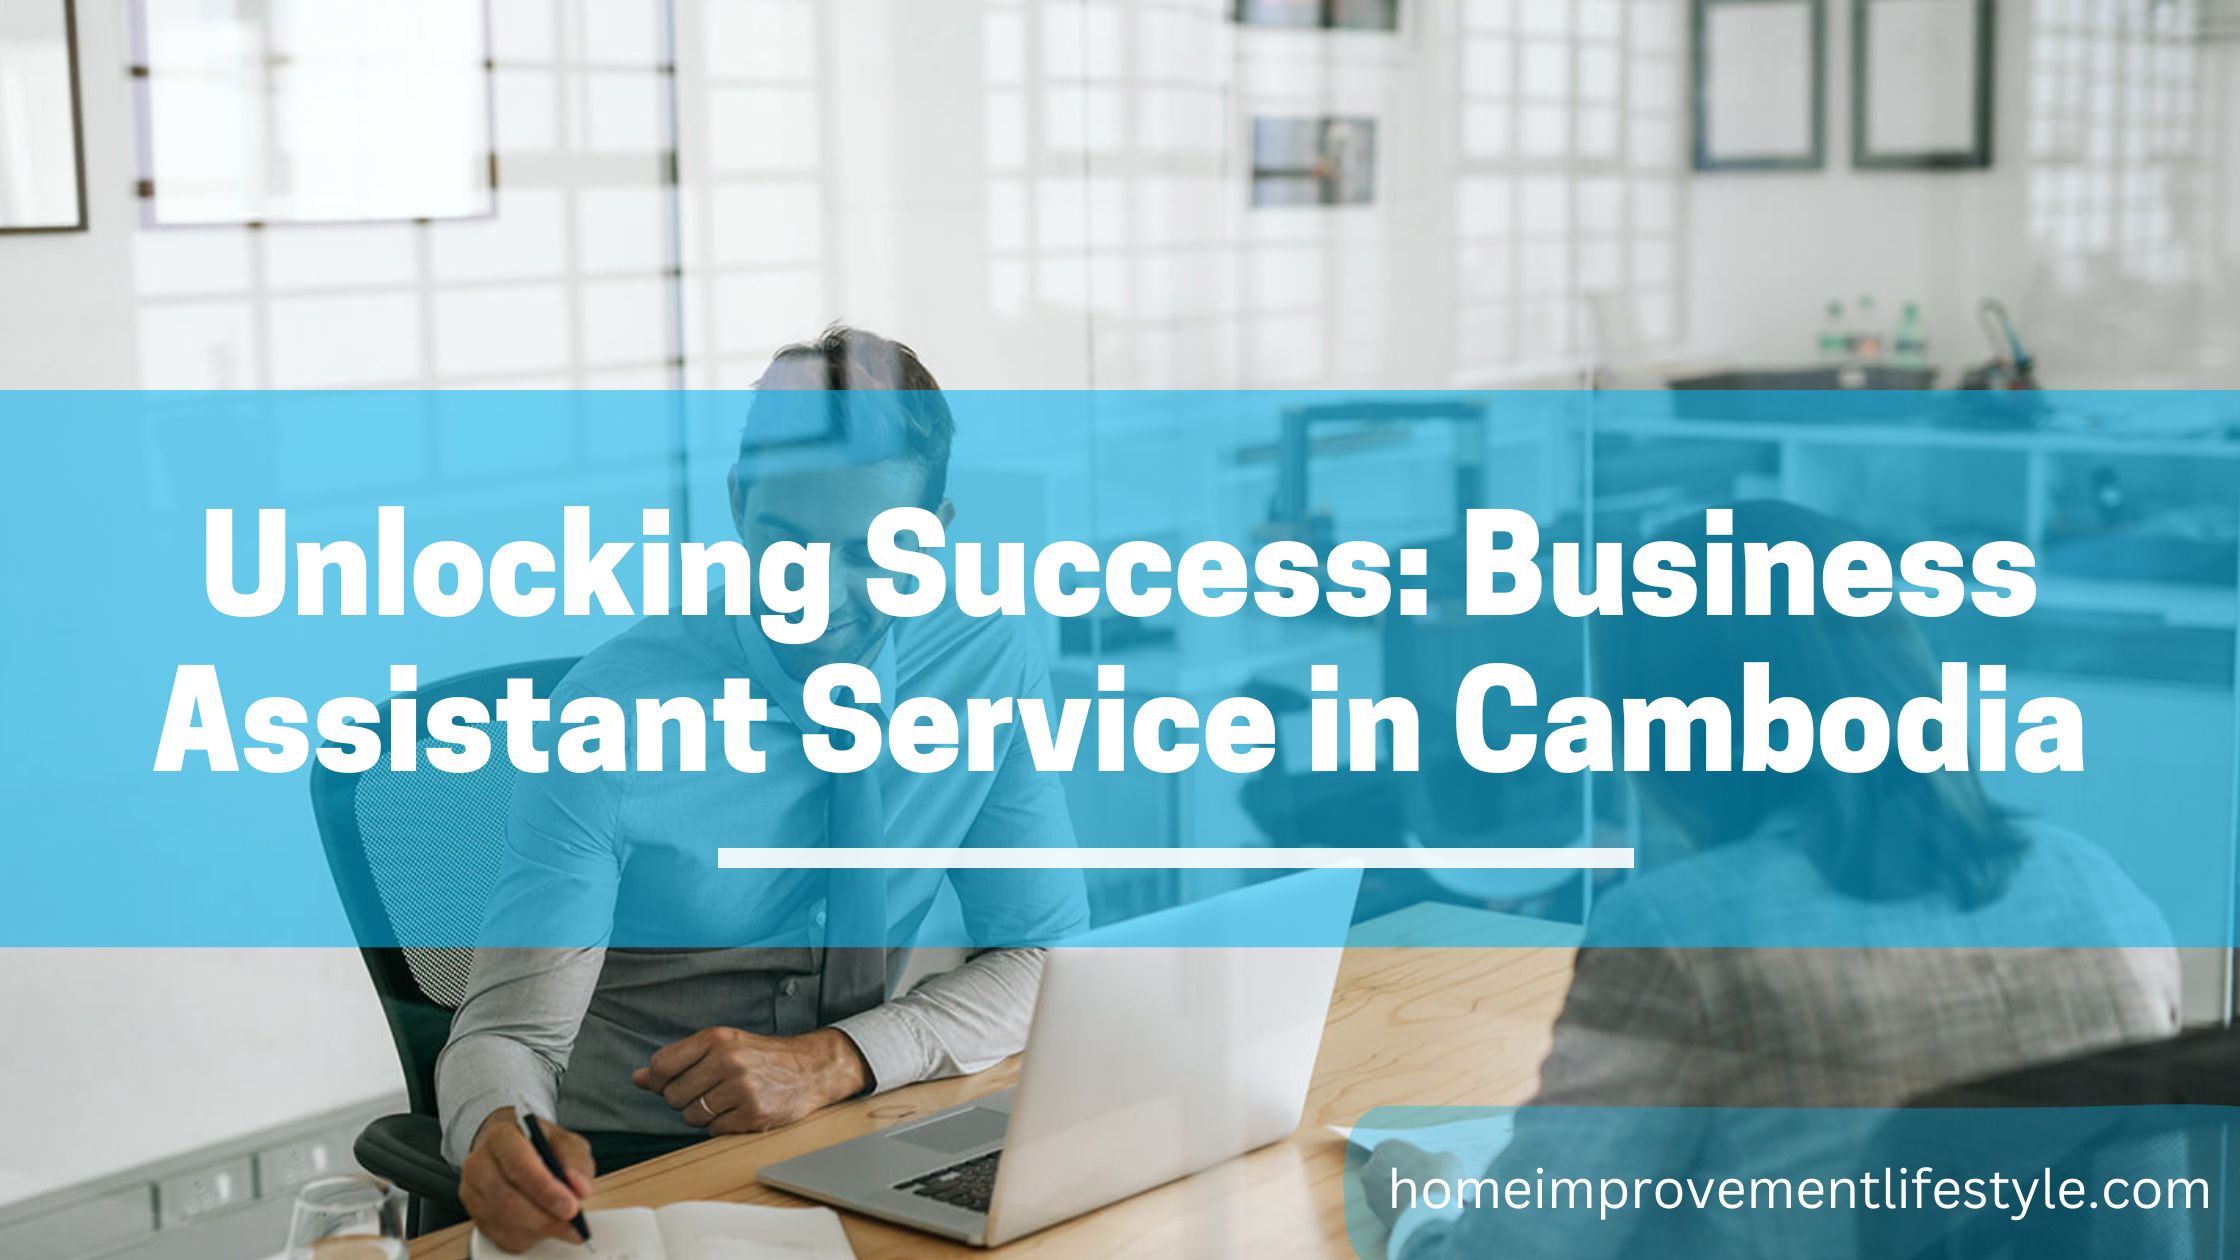 Unlocking Success: Business Assistant Service in Cambodia